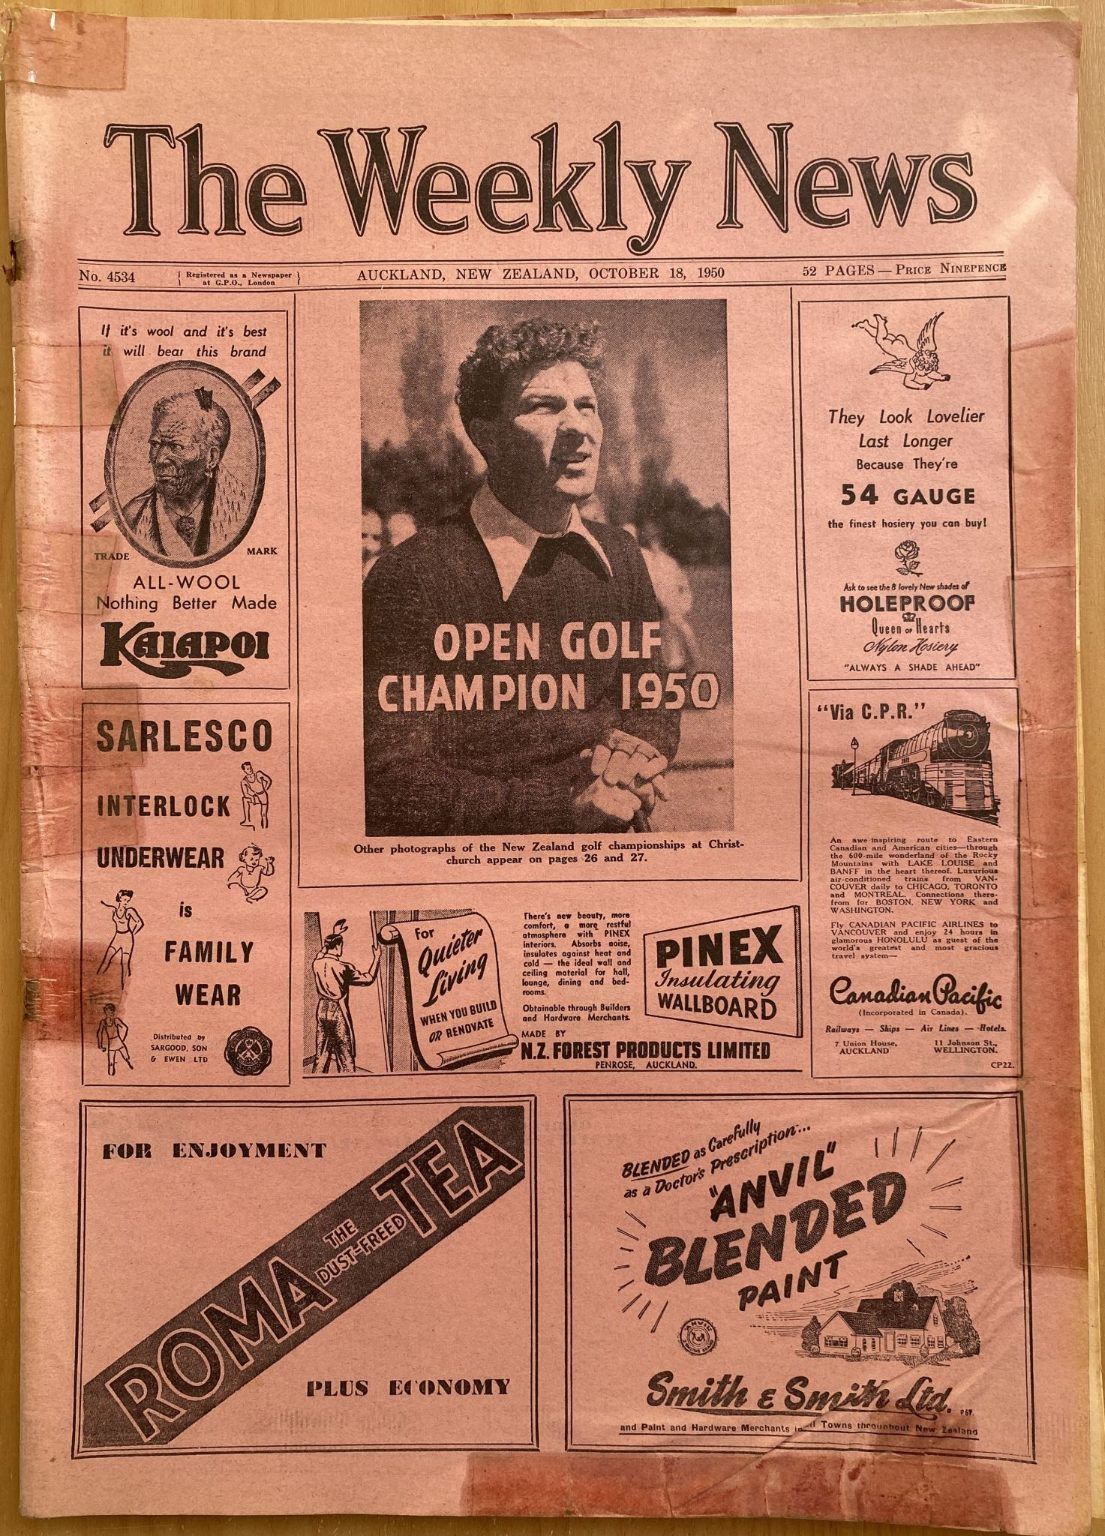 OLD NEWSPAPER: The Weekly News, No. 4534, 18 October 1950